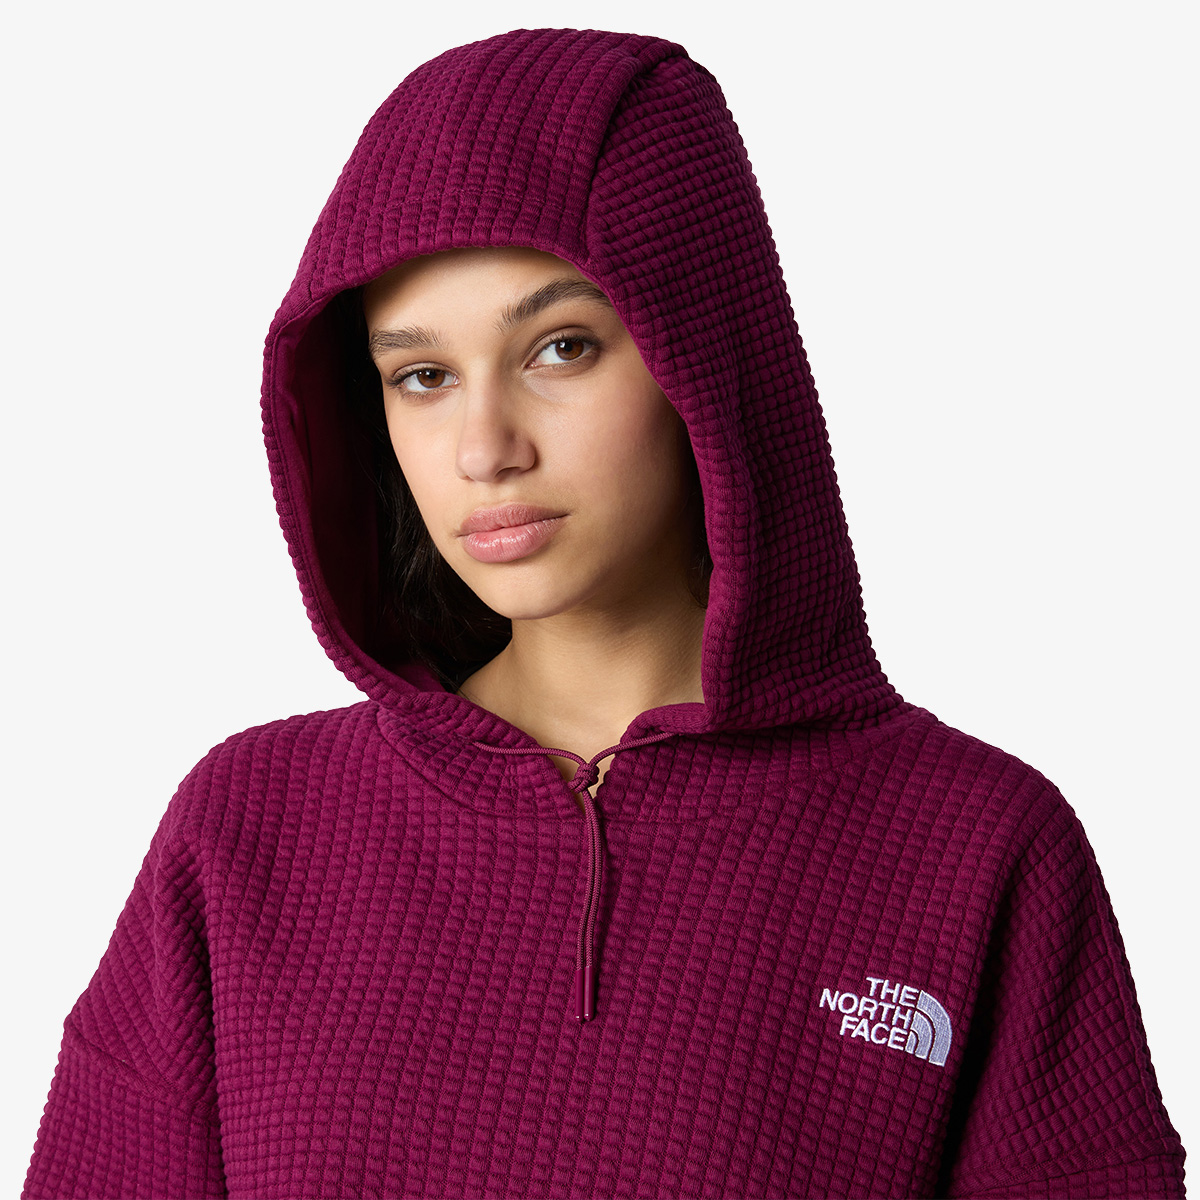 THE NORTH FACE Суитшърт Women’s Mhysa Hoodie 